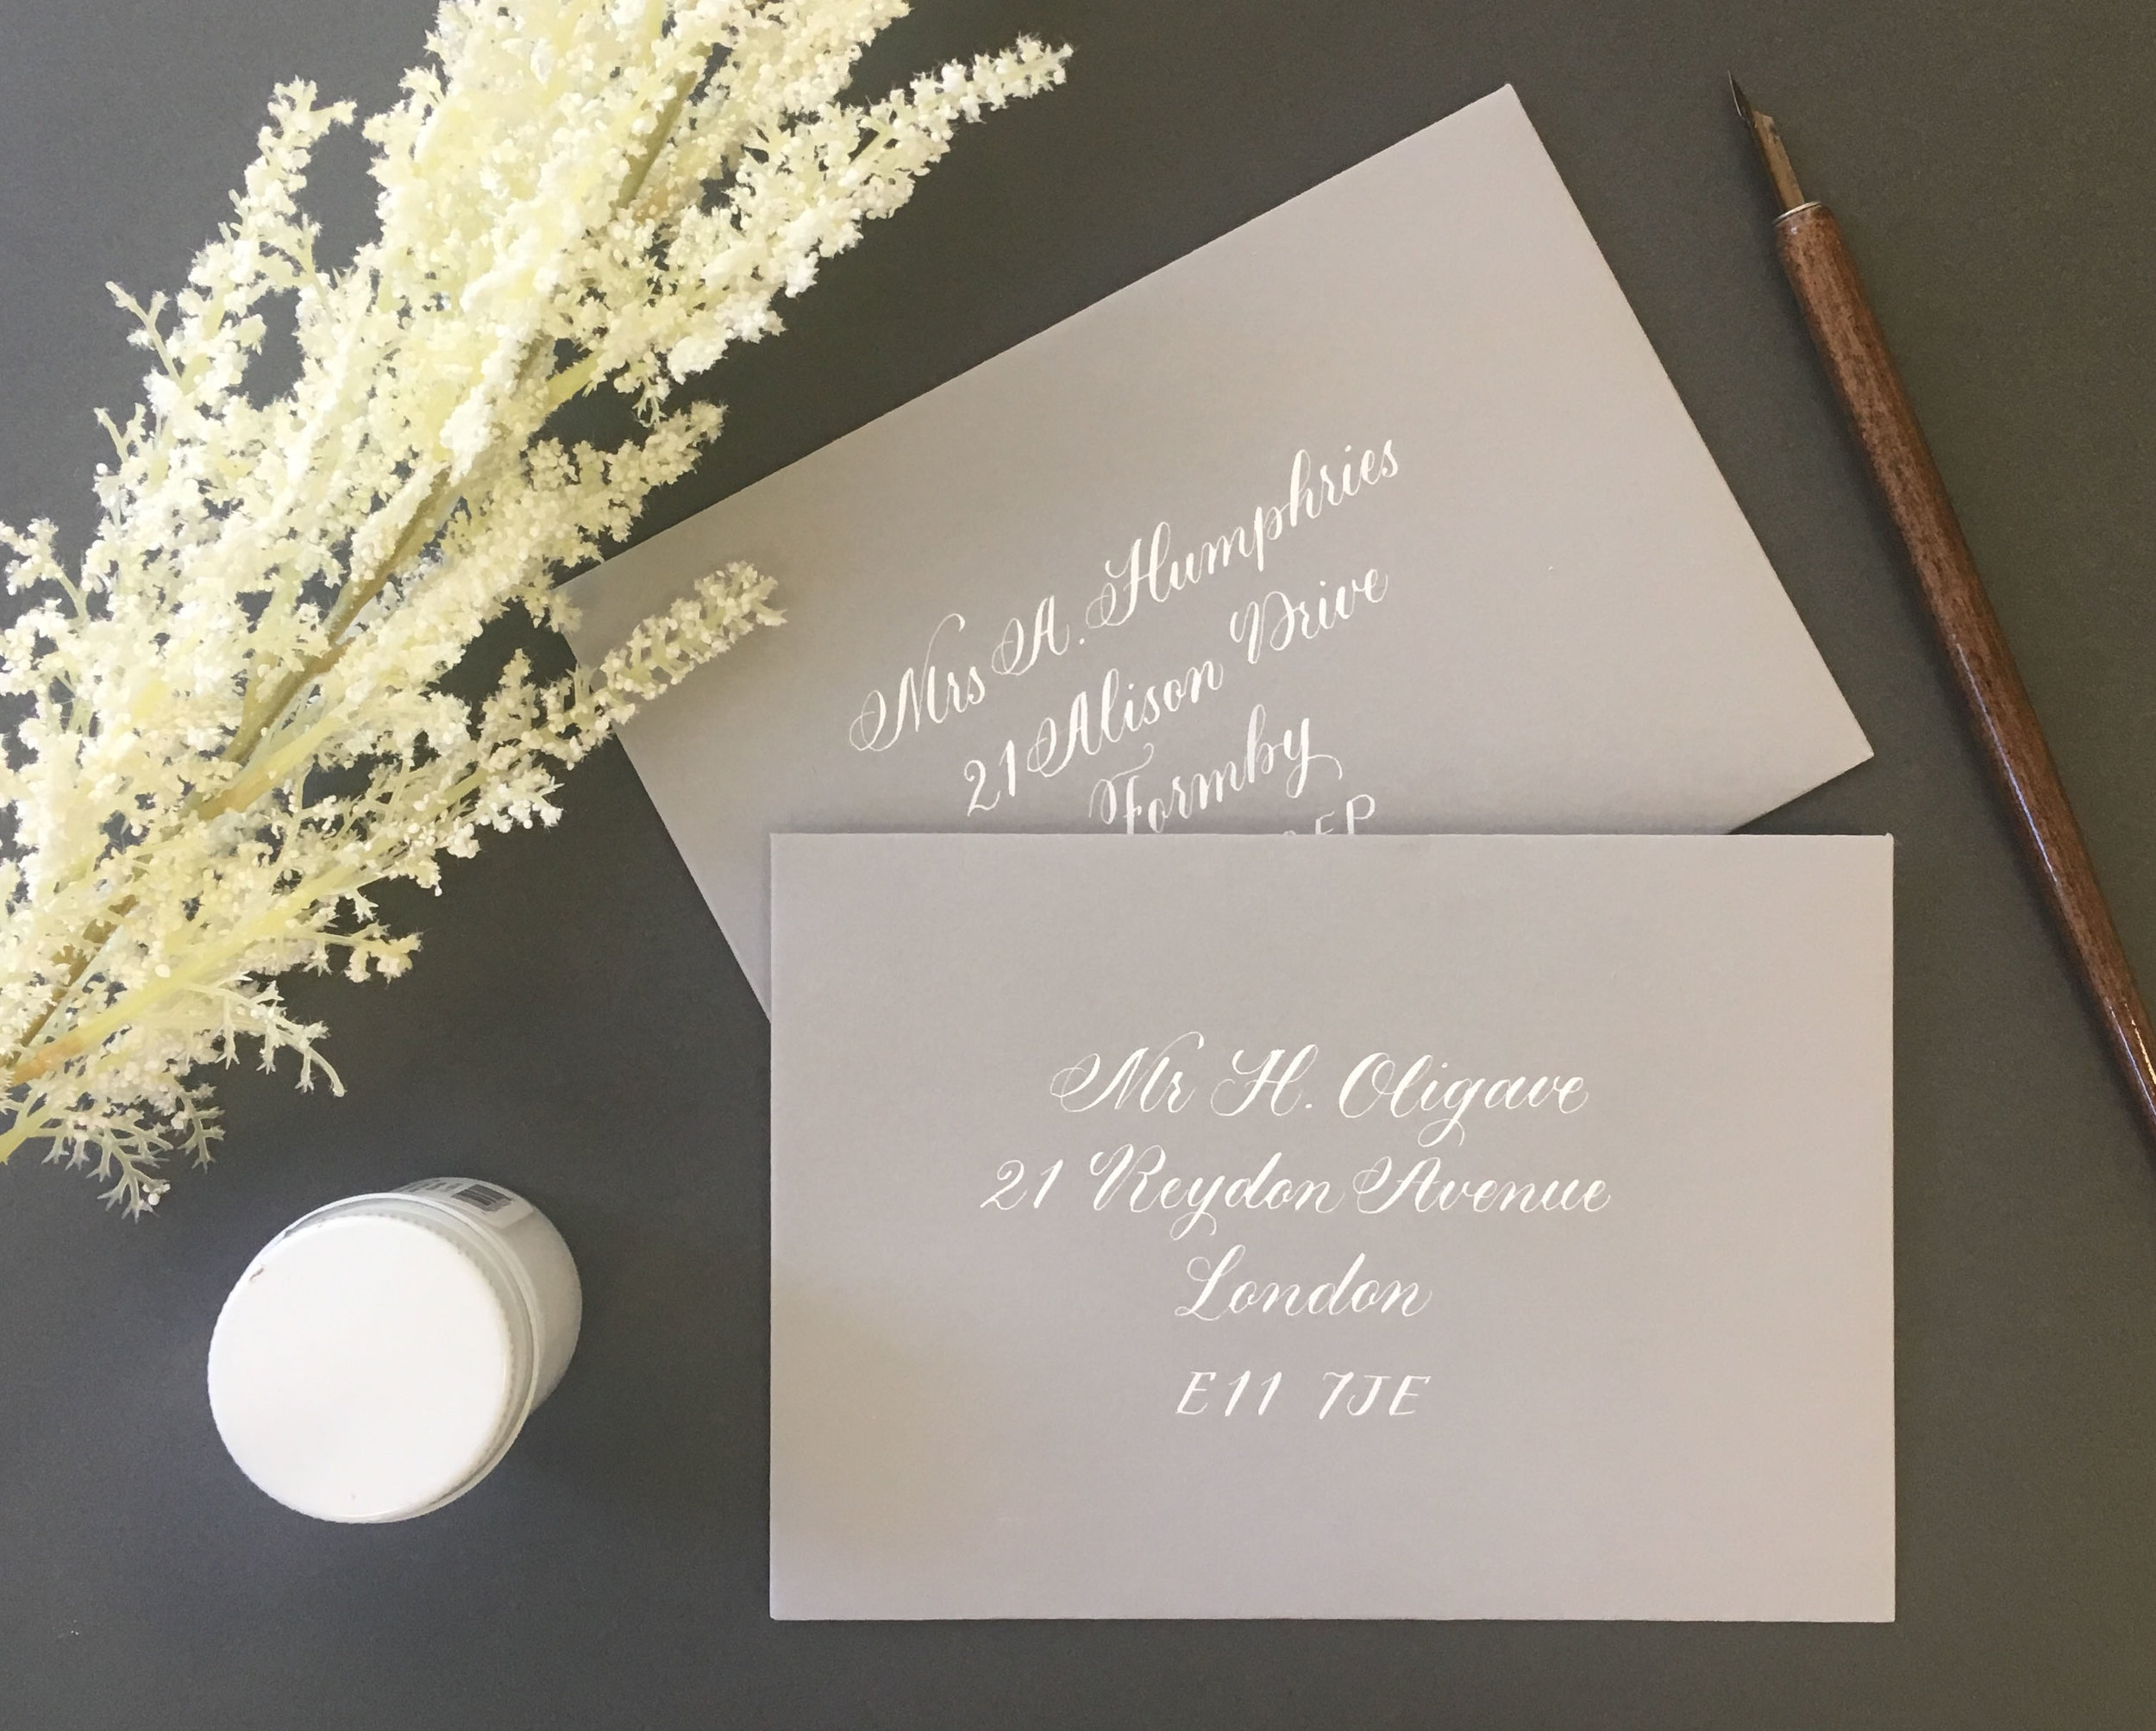 Copperplate calligraphy on envelopes